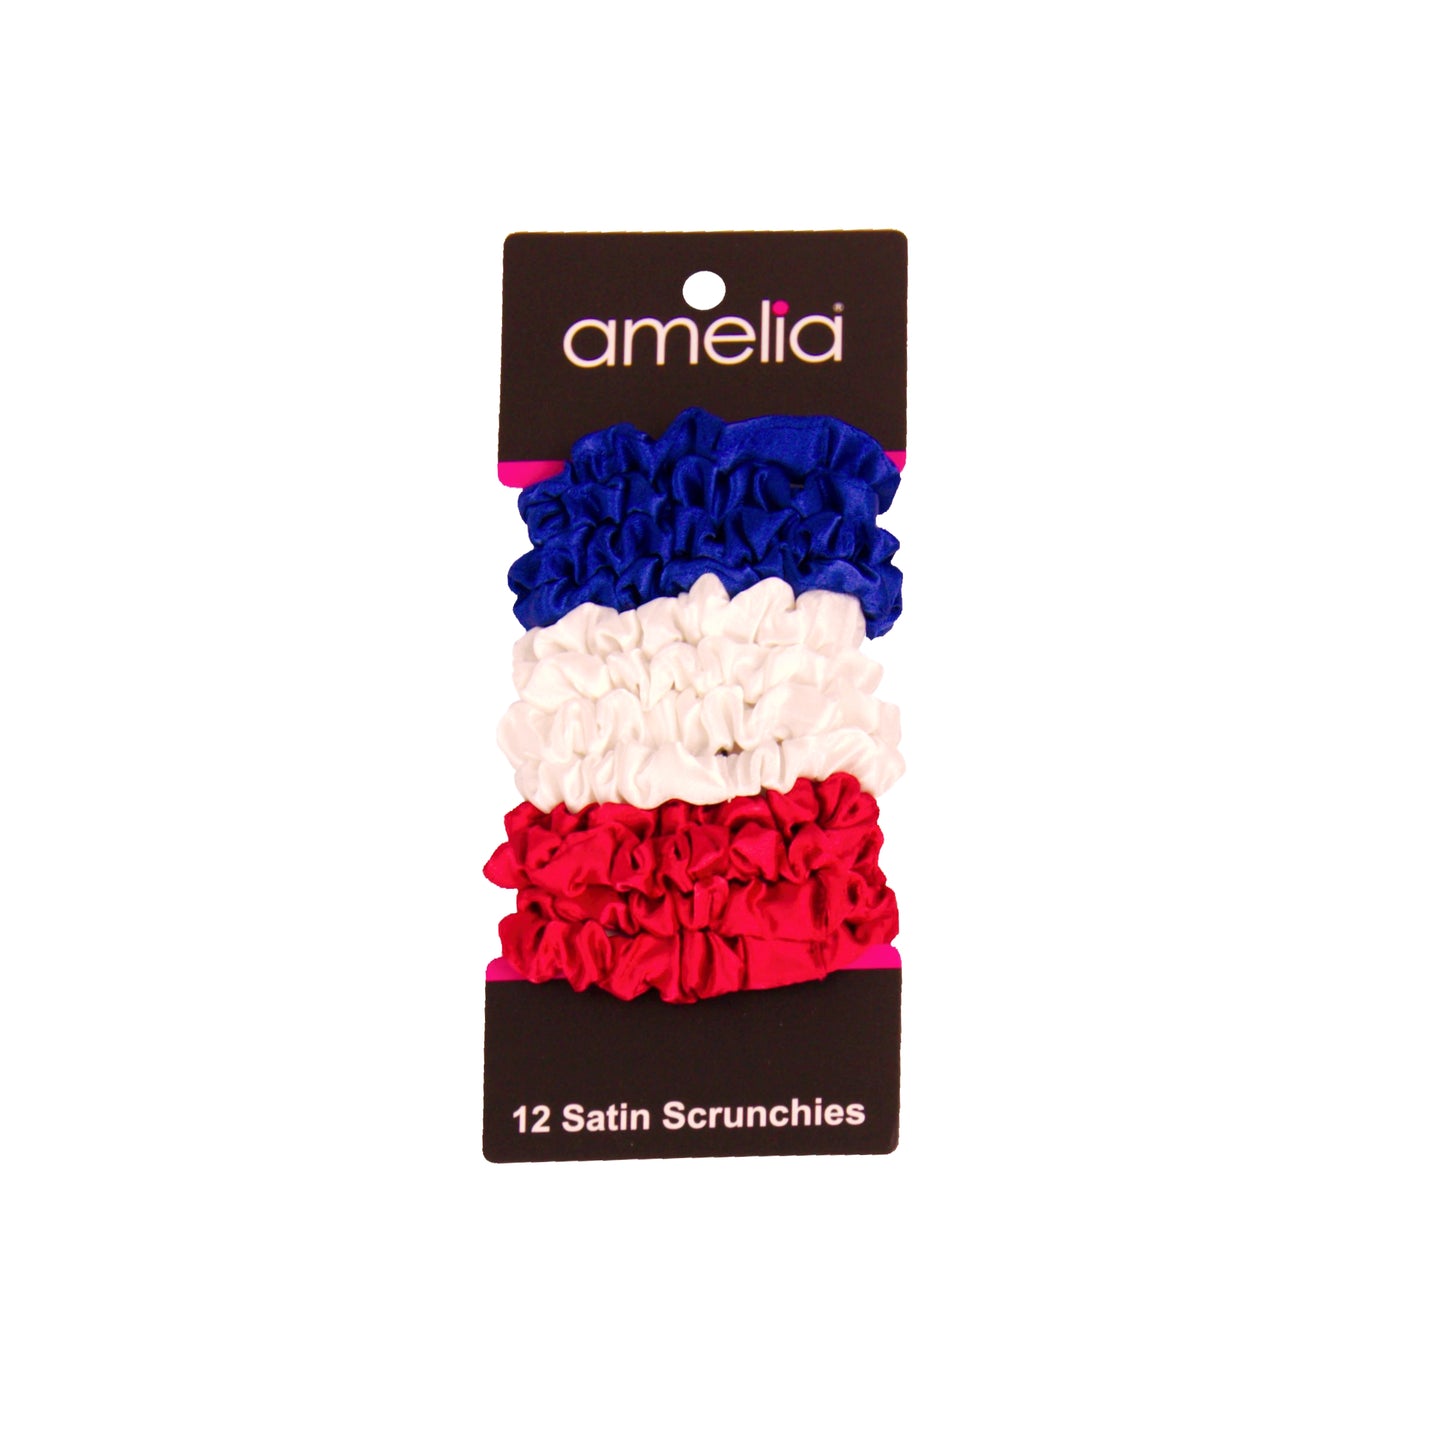 Amelia Beauty, Red, White and Blue Satin Scrunchies, 2.25in Diameter, Gentle on Hair, Strong Hold, No Snag, No Dents or Creases. 12 Pack